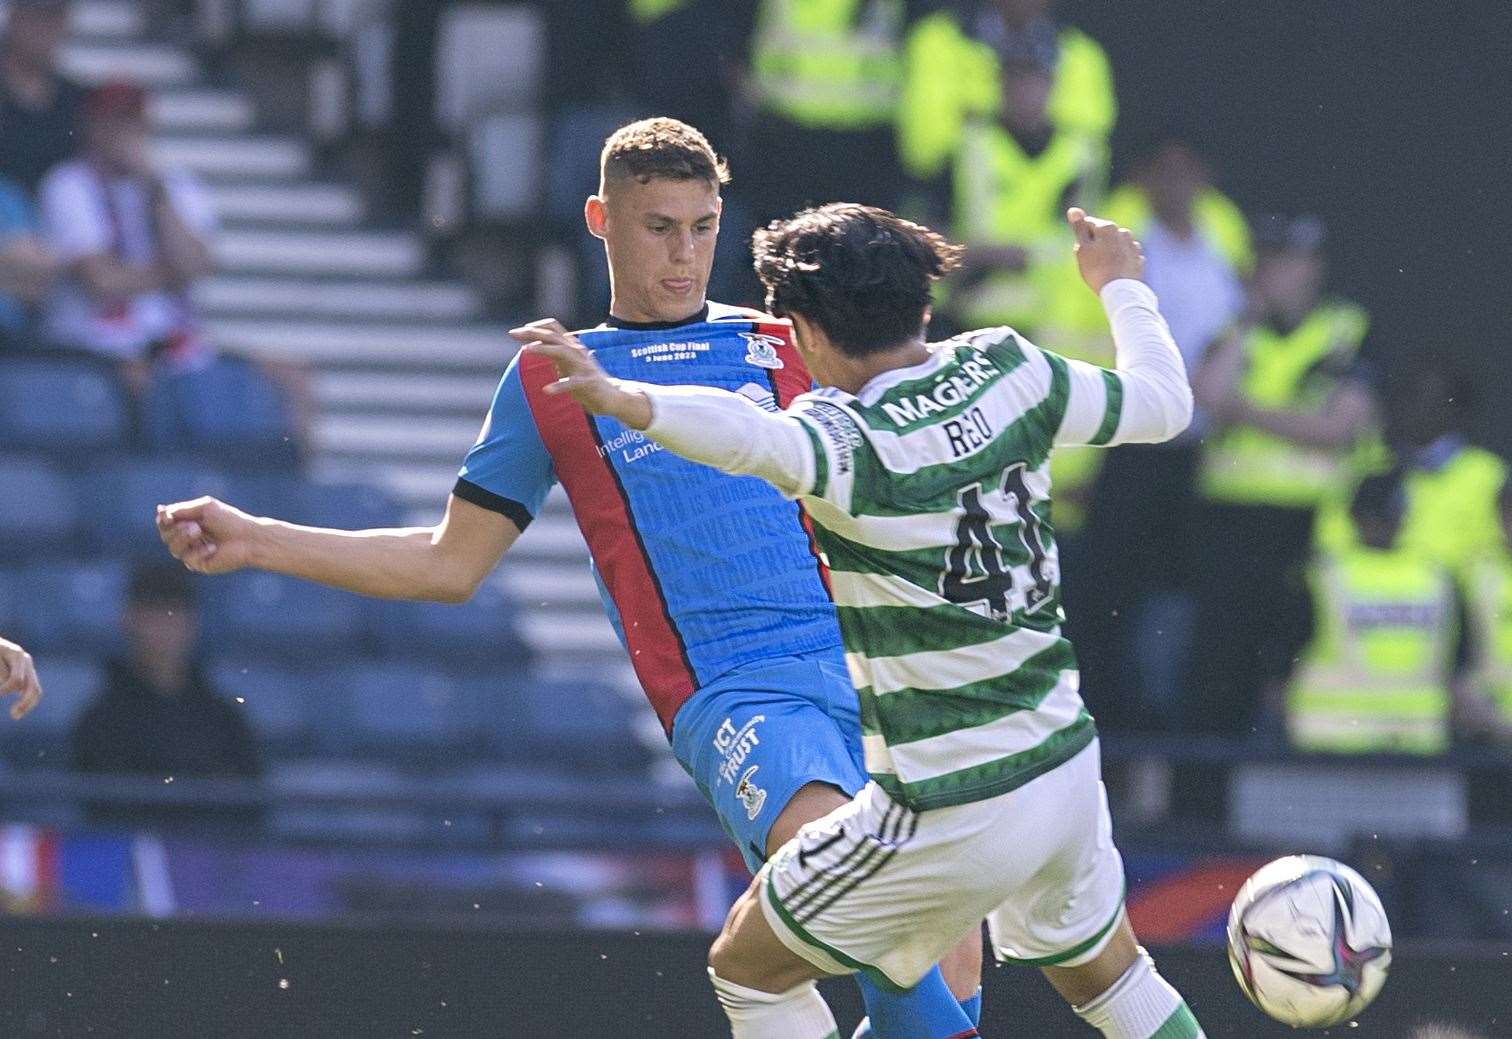 Who was the best player for Inverness Caley Thistle in the Scottish Cup final against Celtic?